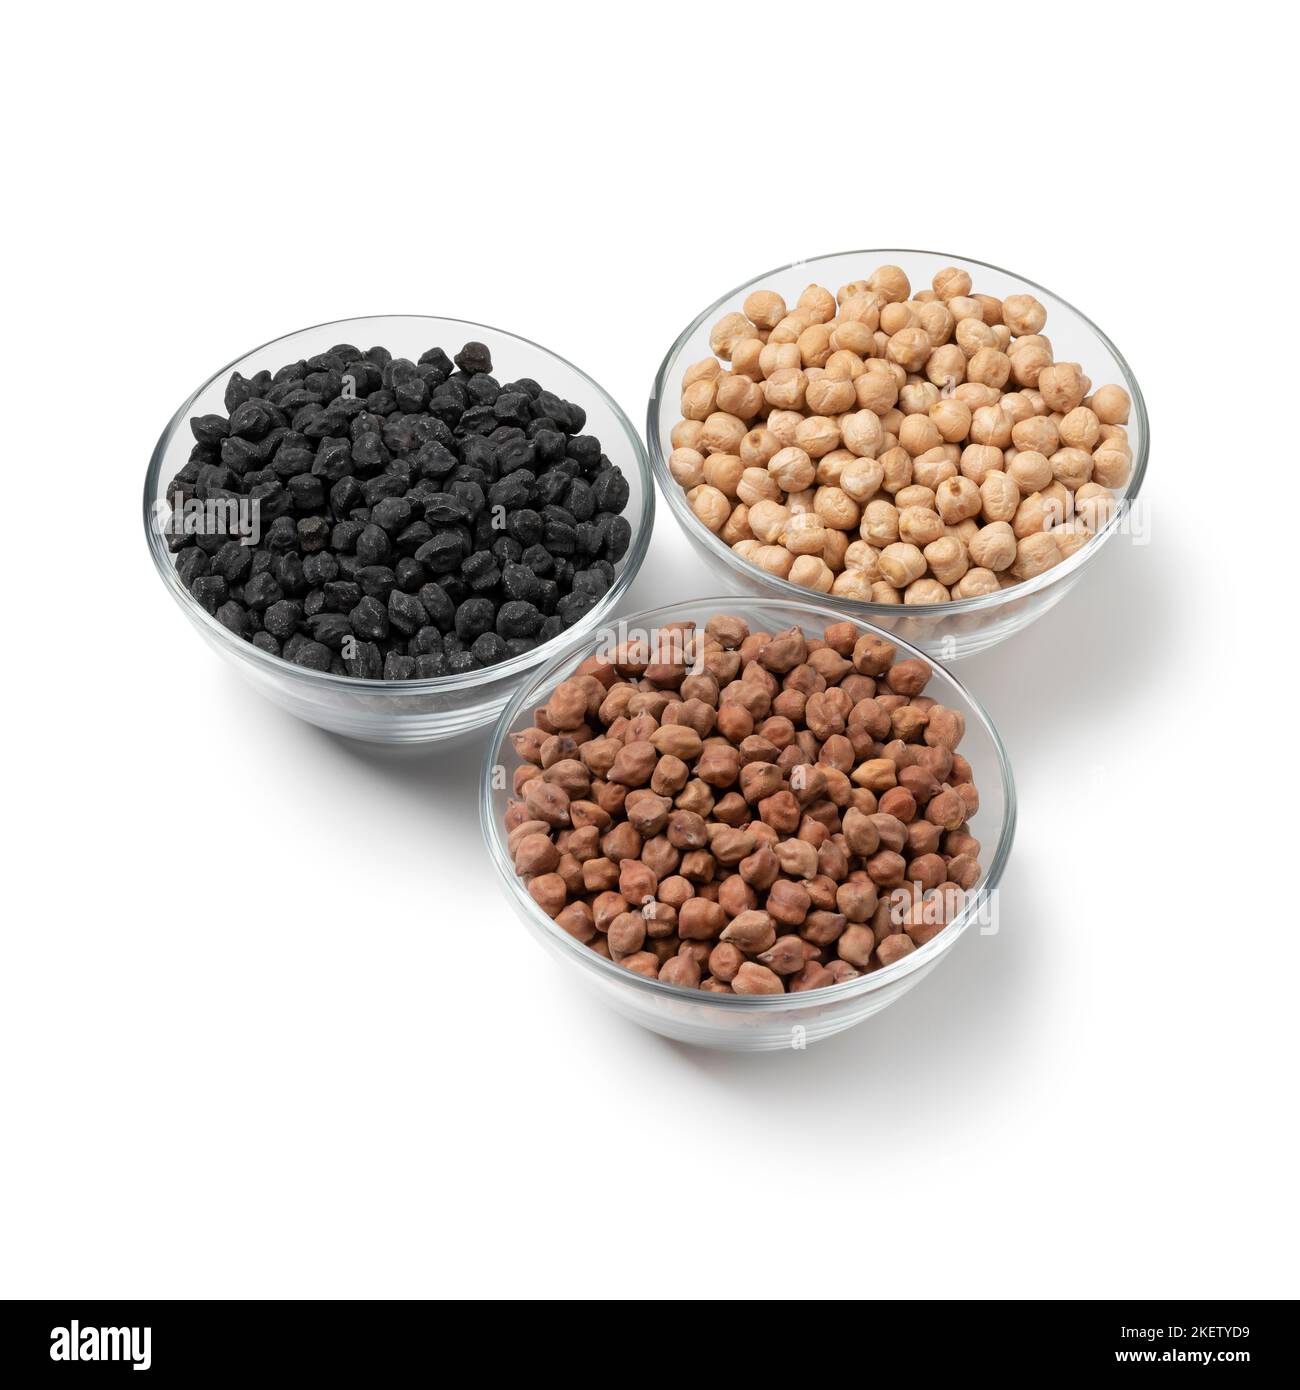 White medterranean garbanzo, black Italian ceci neri and brown indian Kala Chana chickpeas in a glass bowl isolated on white background Stock Photo